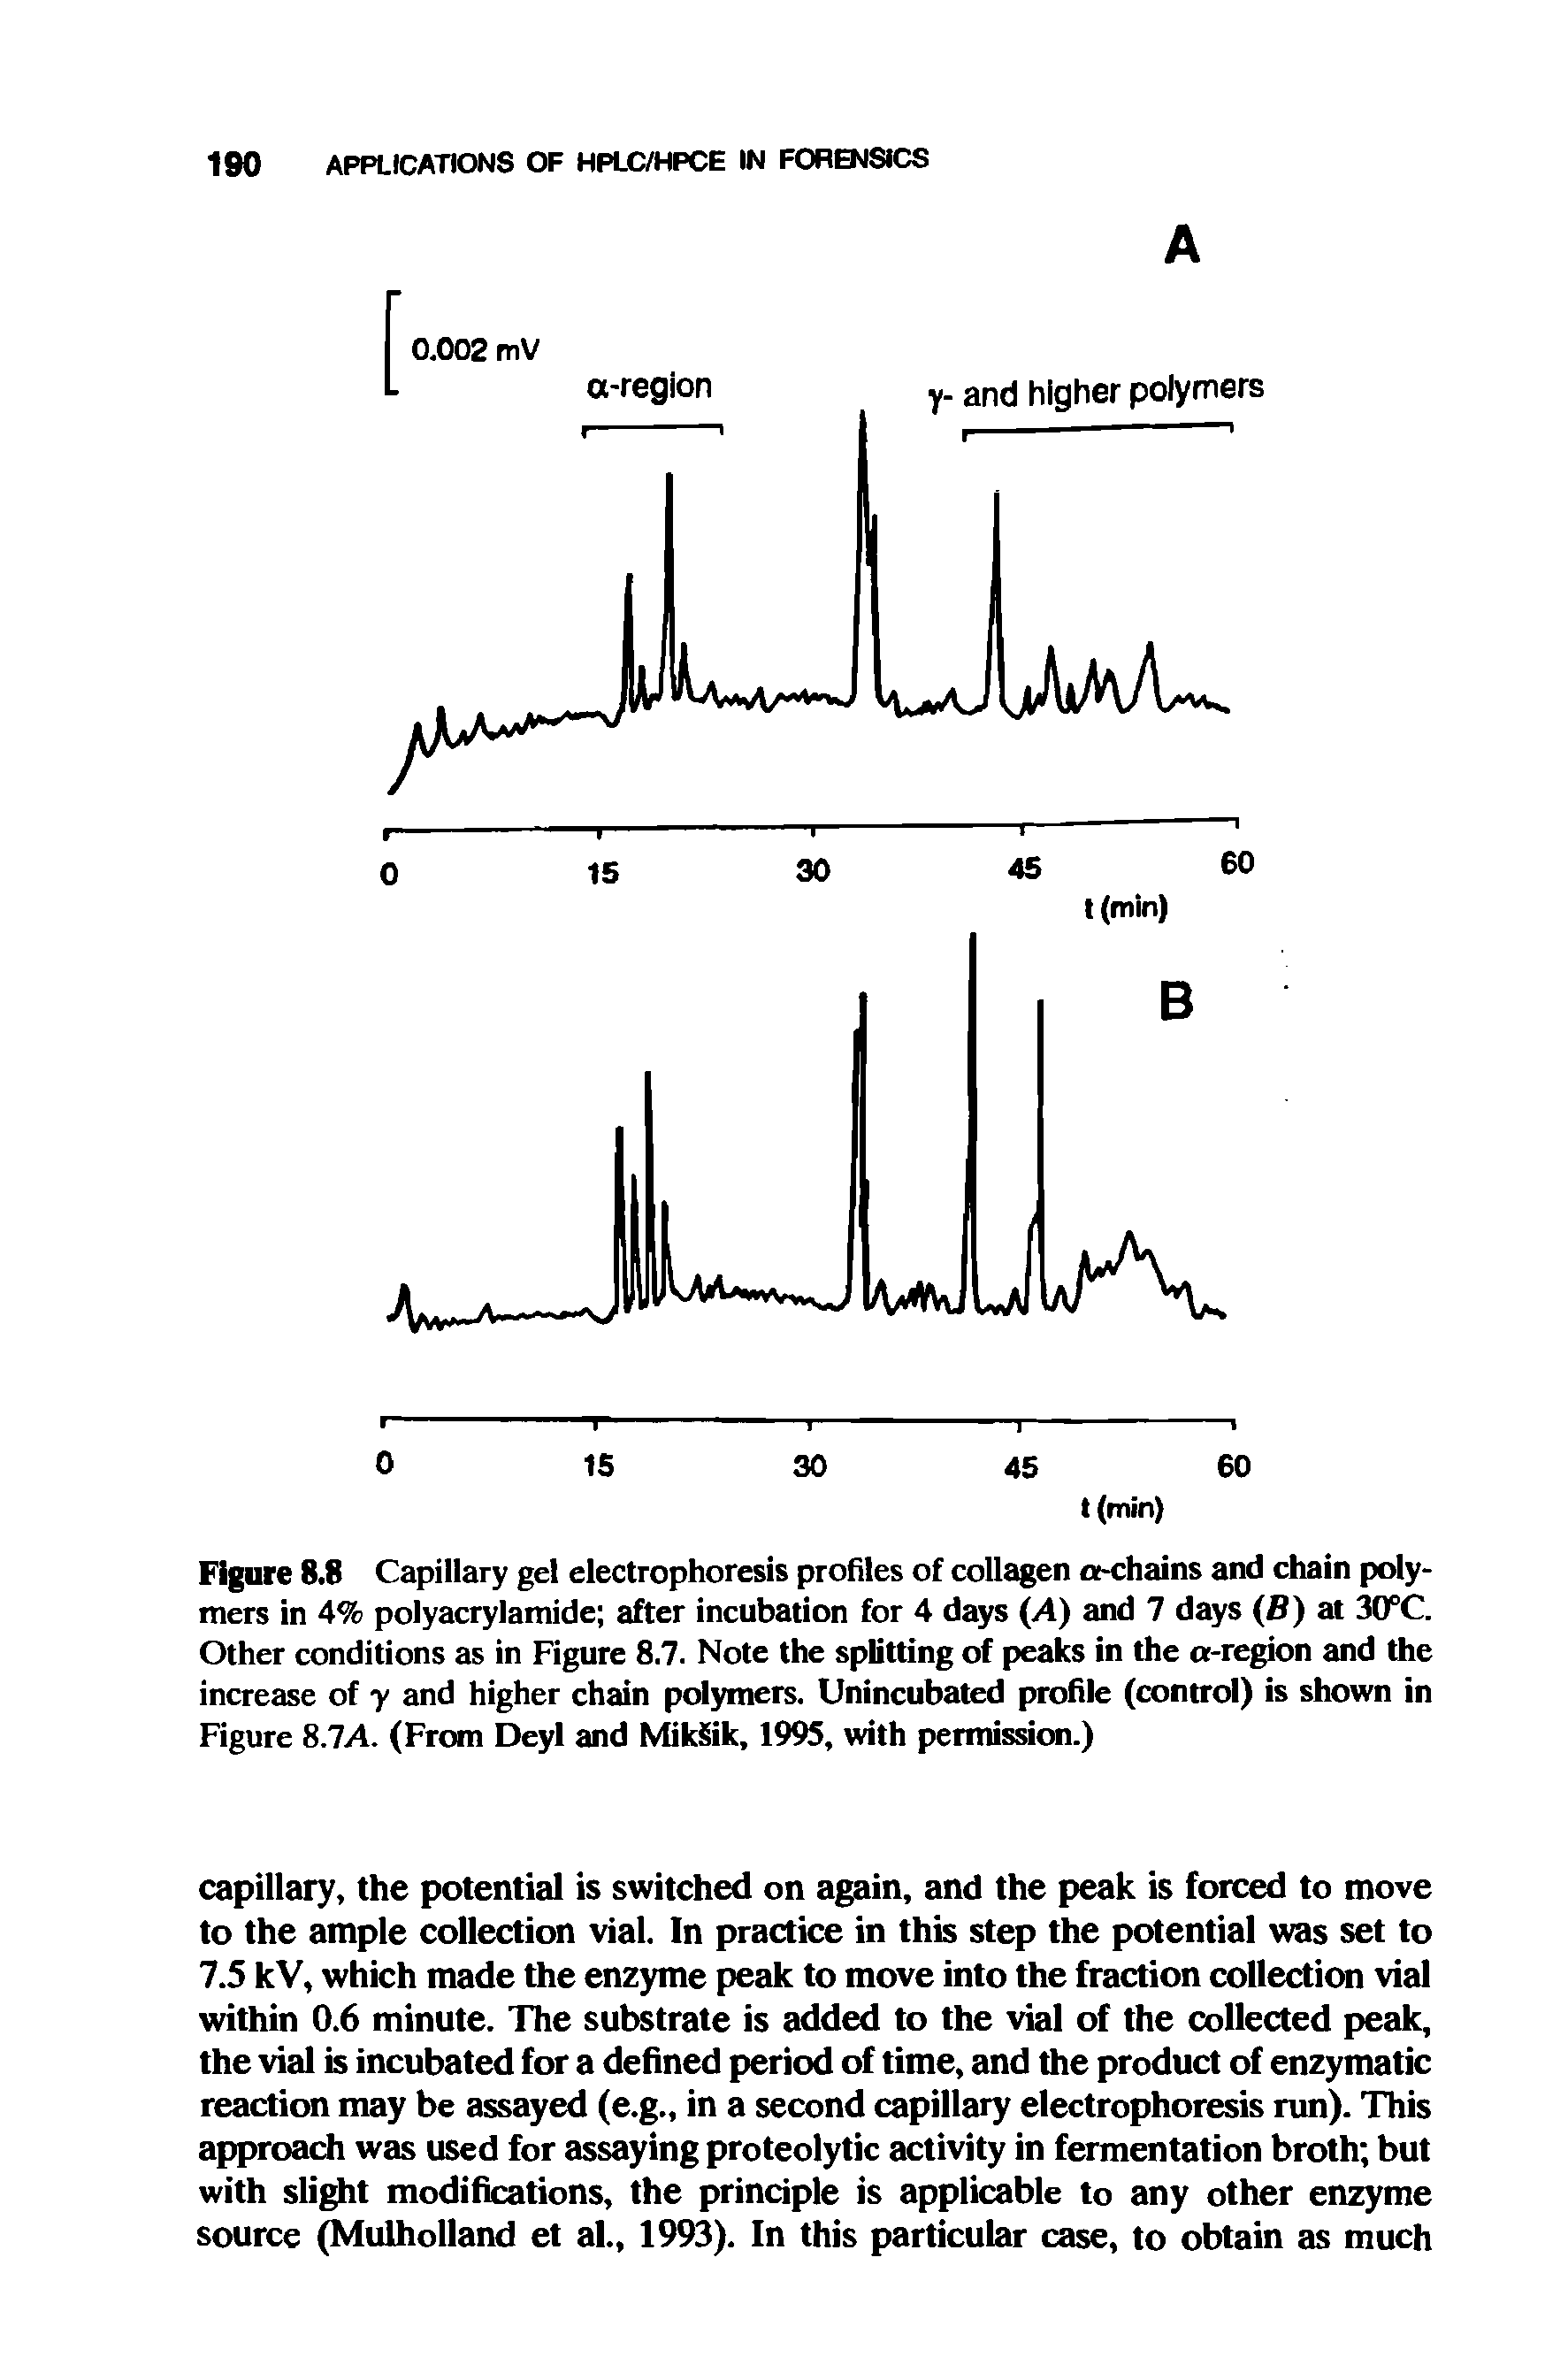 Figure 8.8 Capillary gel electrophoresis profiles of collagen a-chains and chain polymers in 4% polyacrylamide after incubation for 4 days A) and 7 days (fl) at 30°C. Other conditions as in Figure 8.7. Note the splitting of peaks in the cr-region and the increase of y and higher chain polymers. Unincubated profile (control) is shown in Figure 8.7A. (From Deyl and MikSik, 1995, with permission.)...